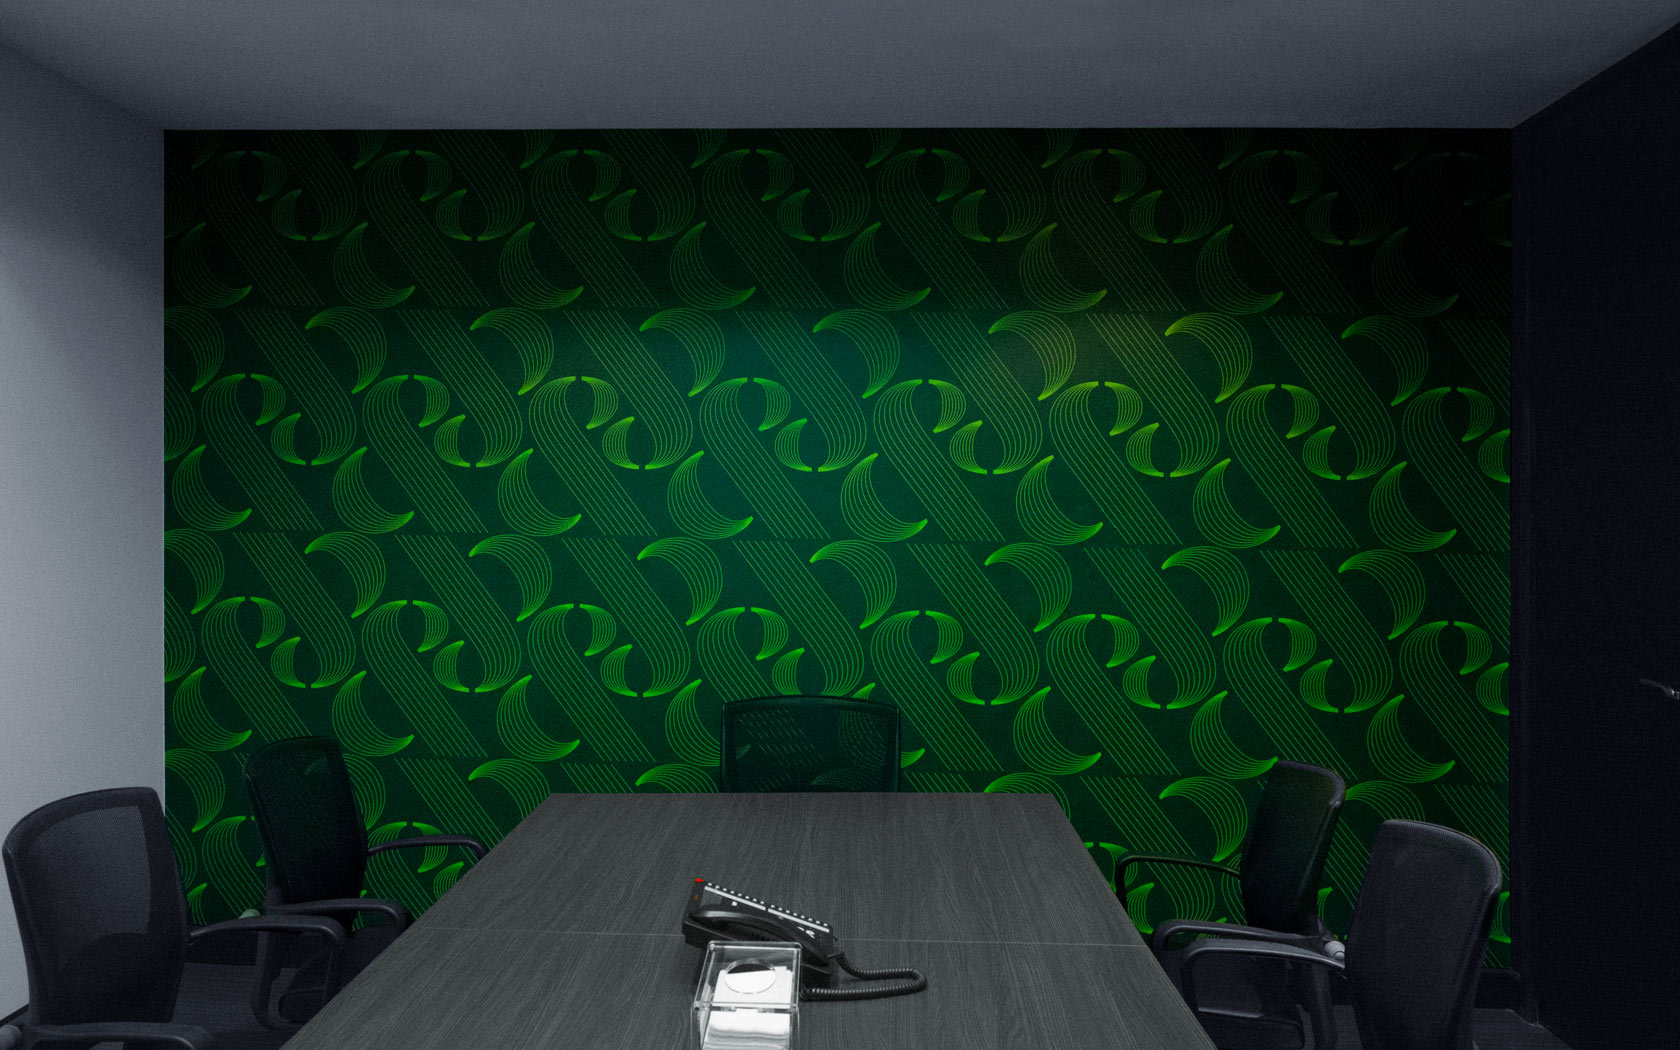 Raees & Co. Conference room branding